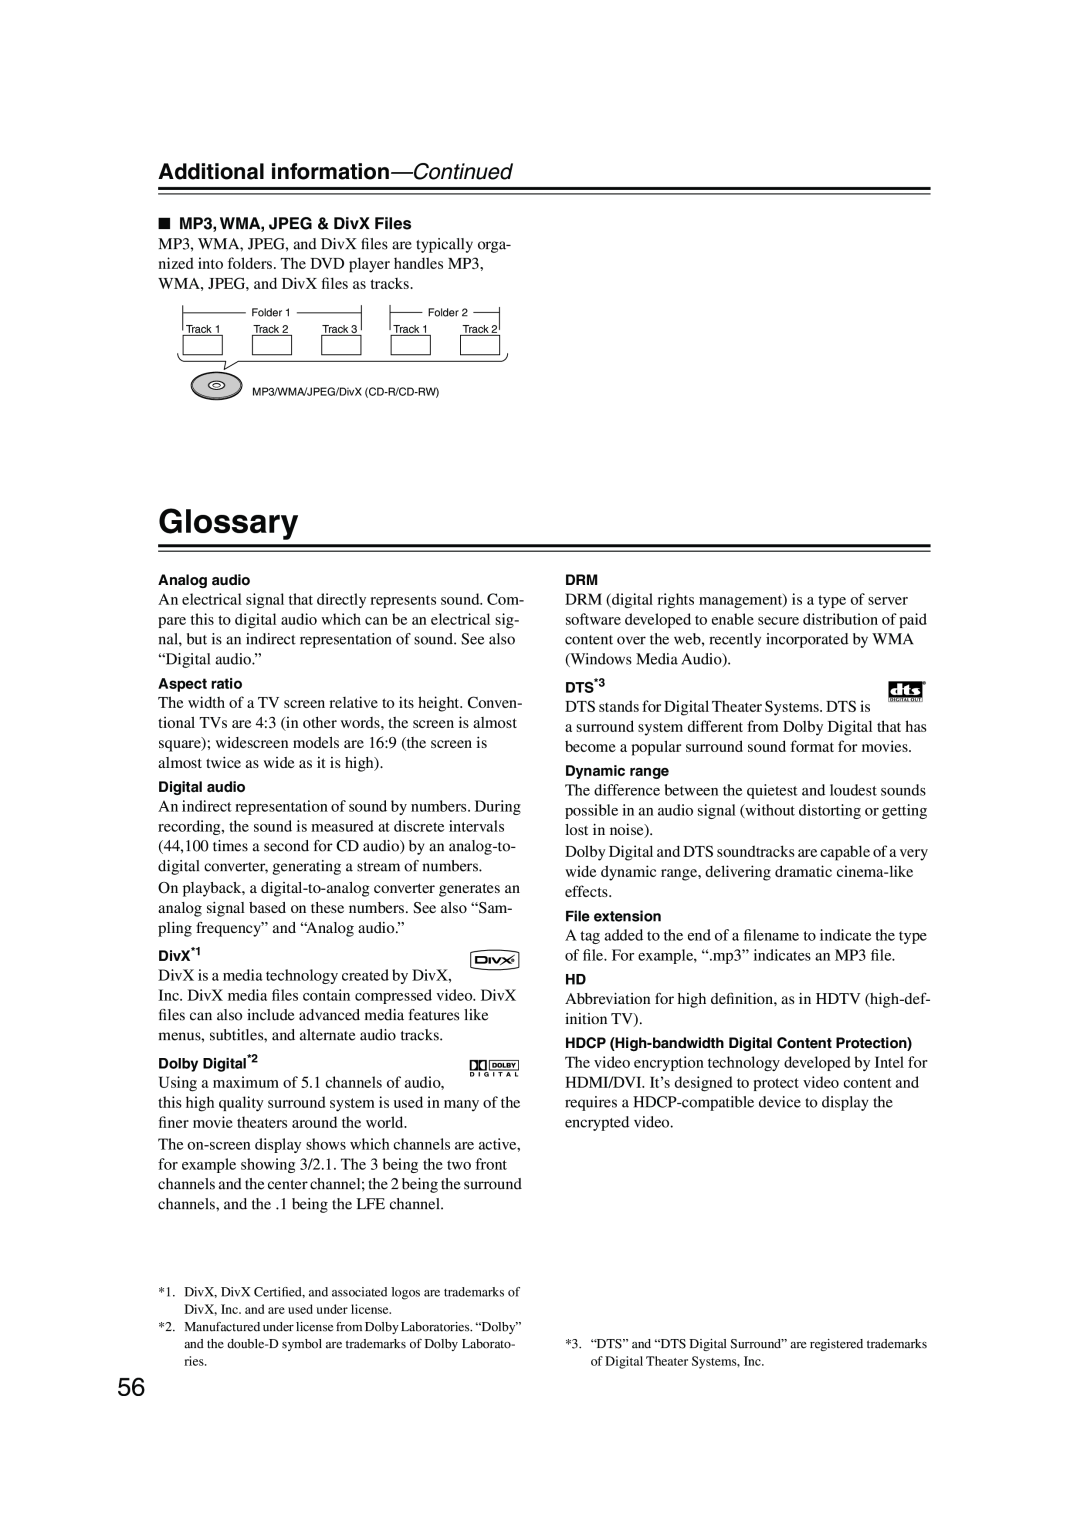 Onkyo DV-SP504E instruction manual Glossary, Additional information-Continued 